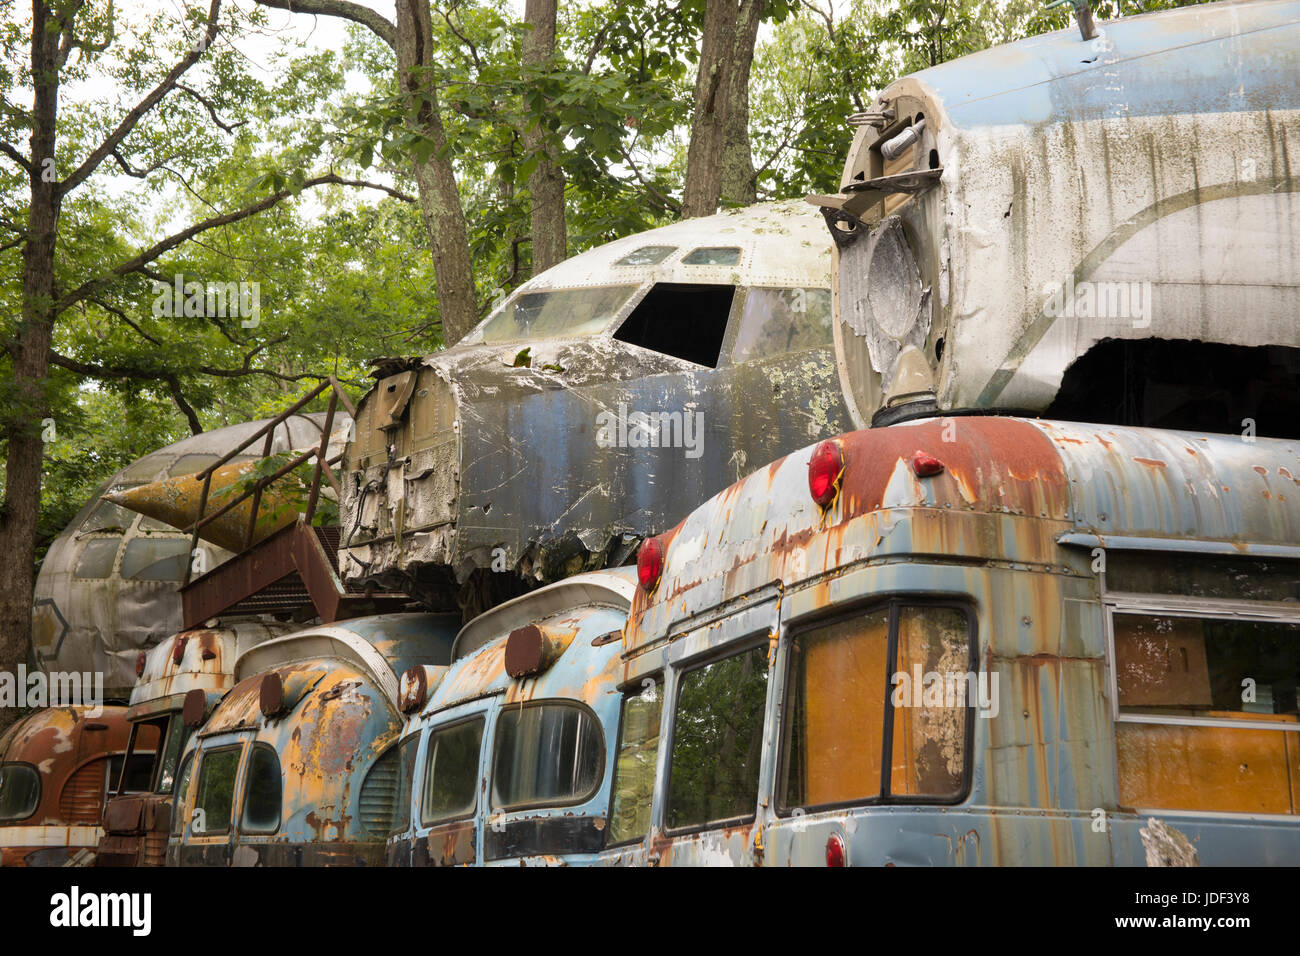 Cockpit units of wrecked military aircraft on top of transport busses in junkyard. Stock Photo